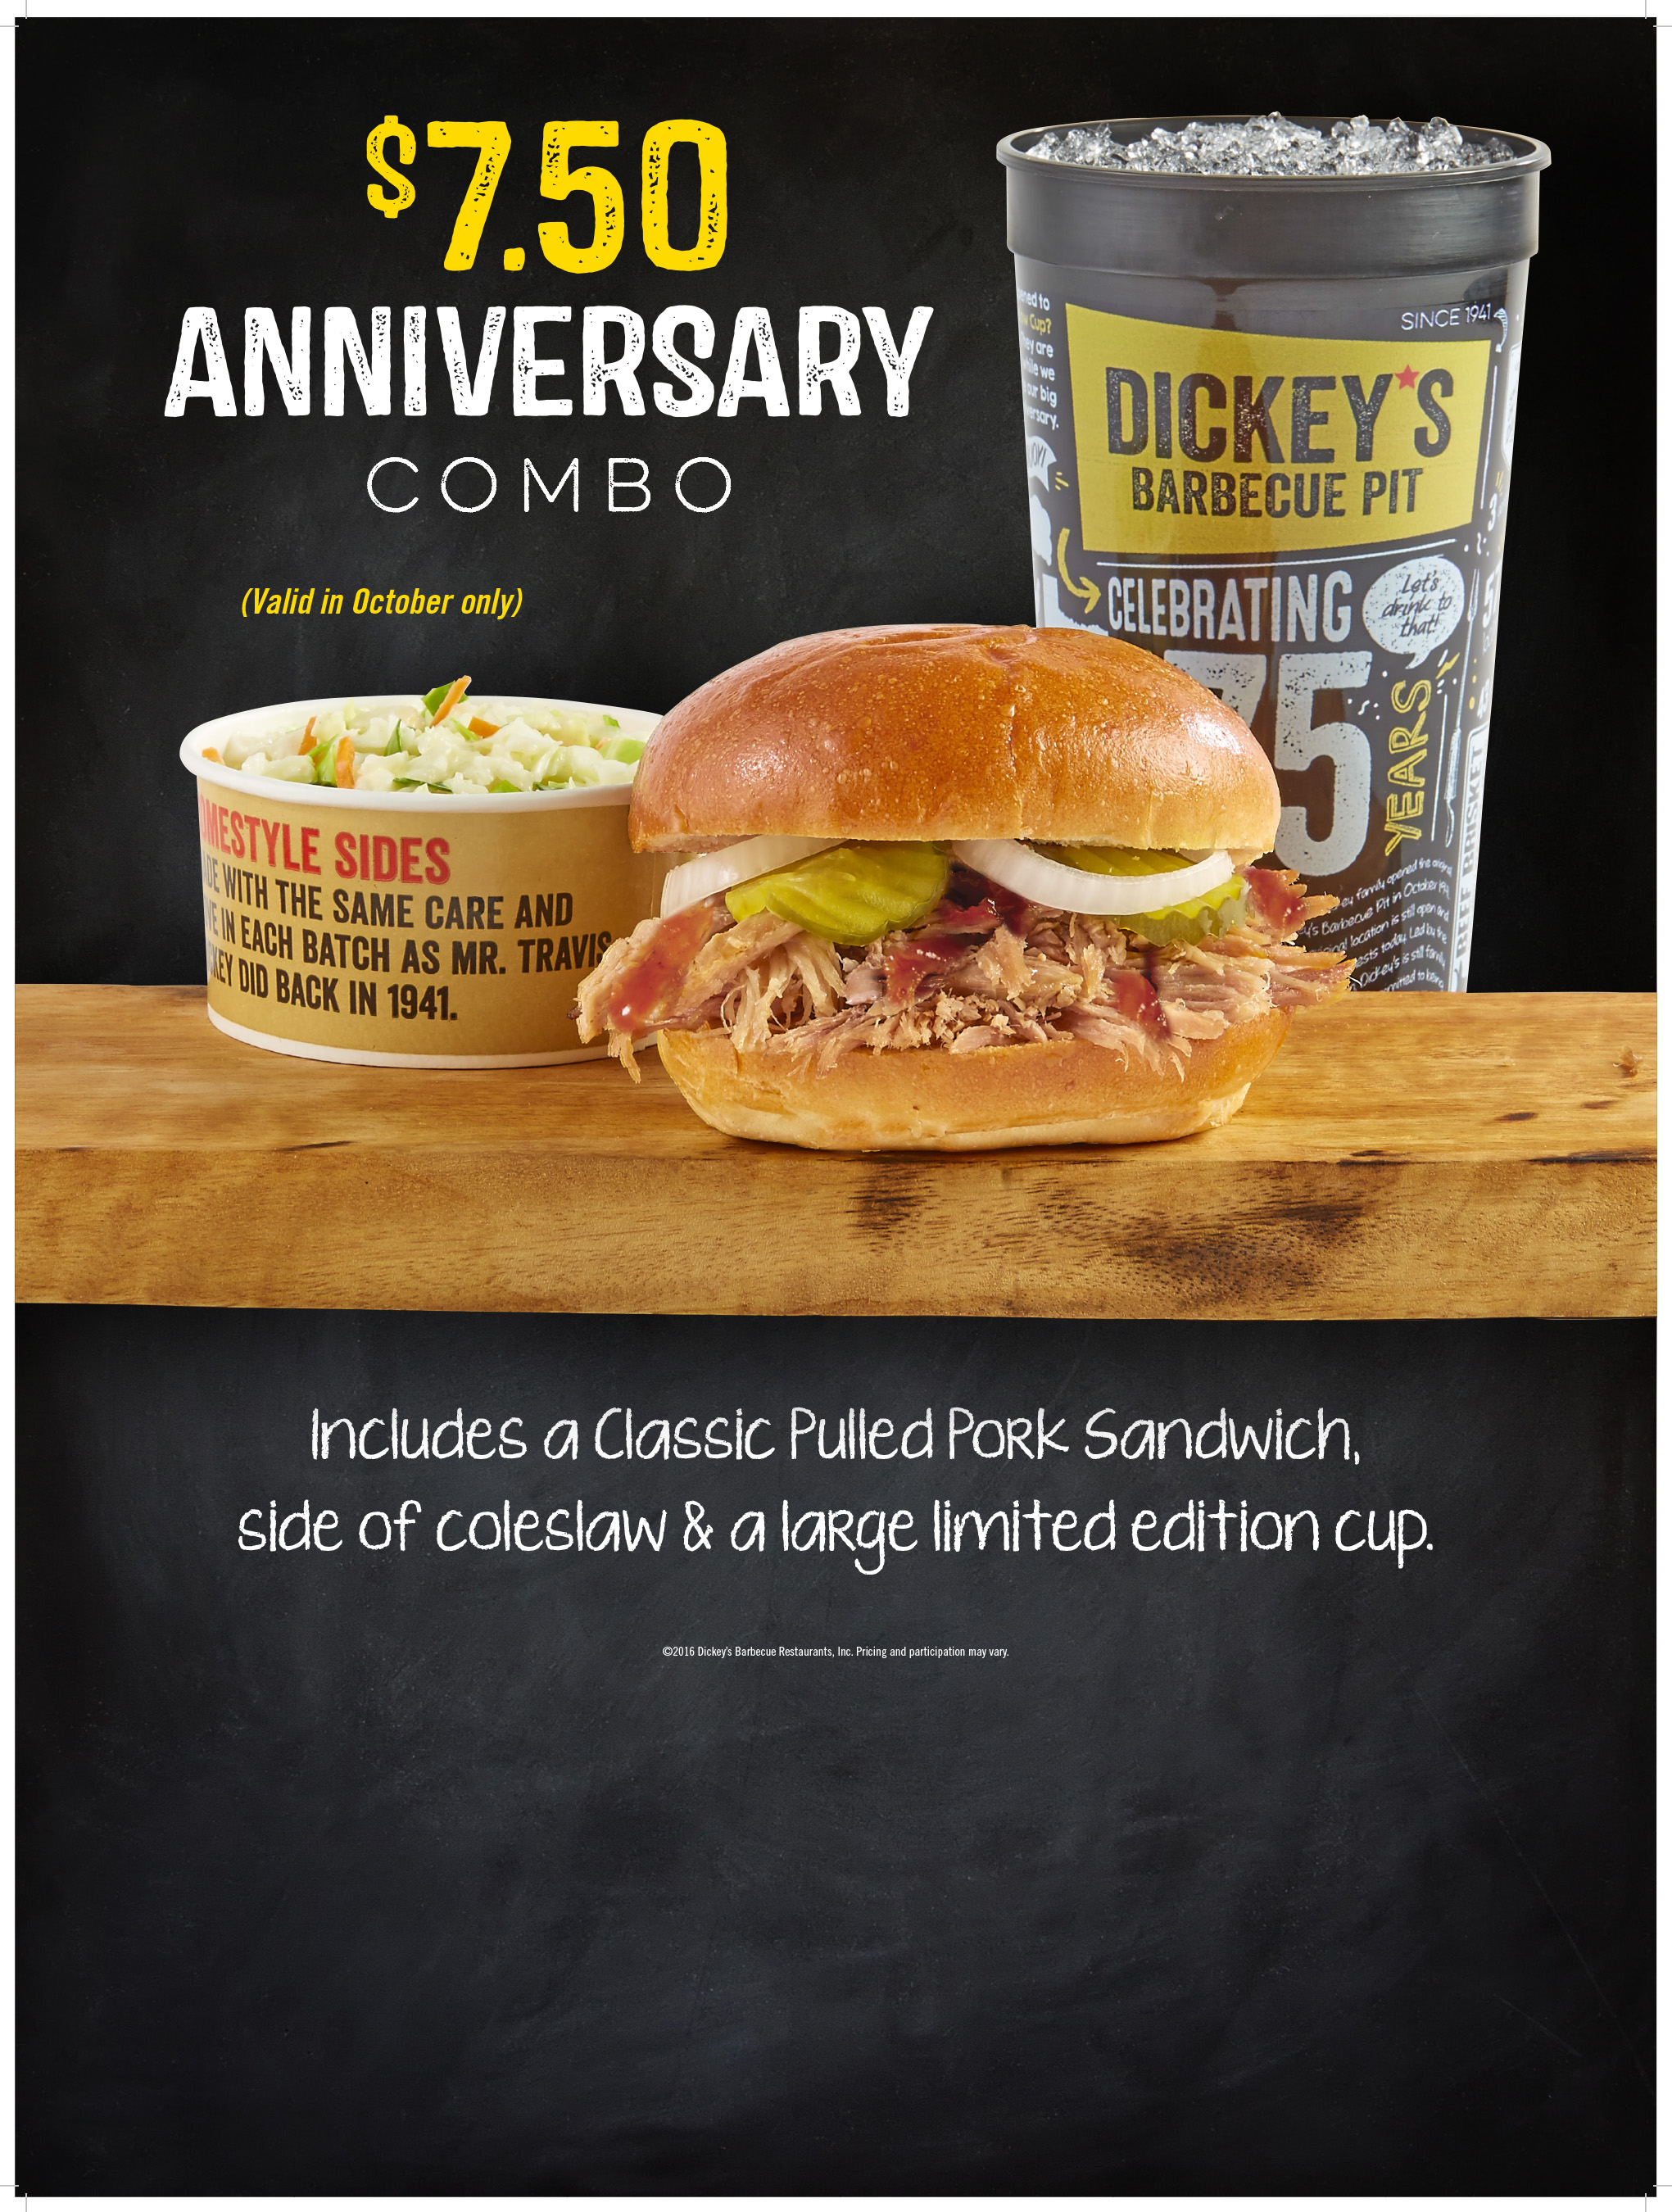 What side items are available on the Dickey's Barbecue Pit?